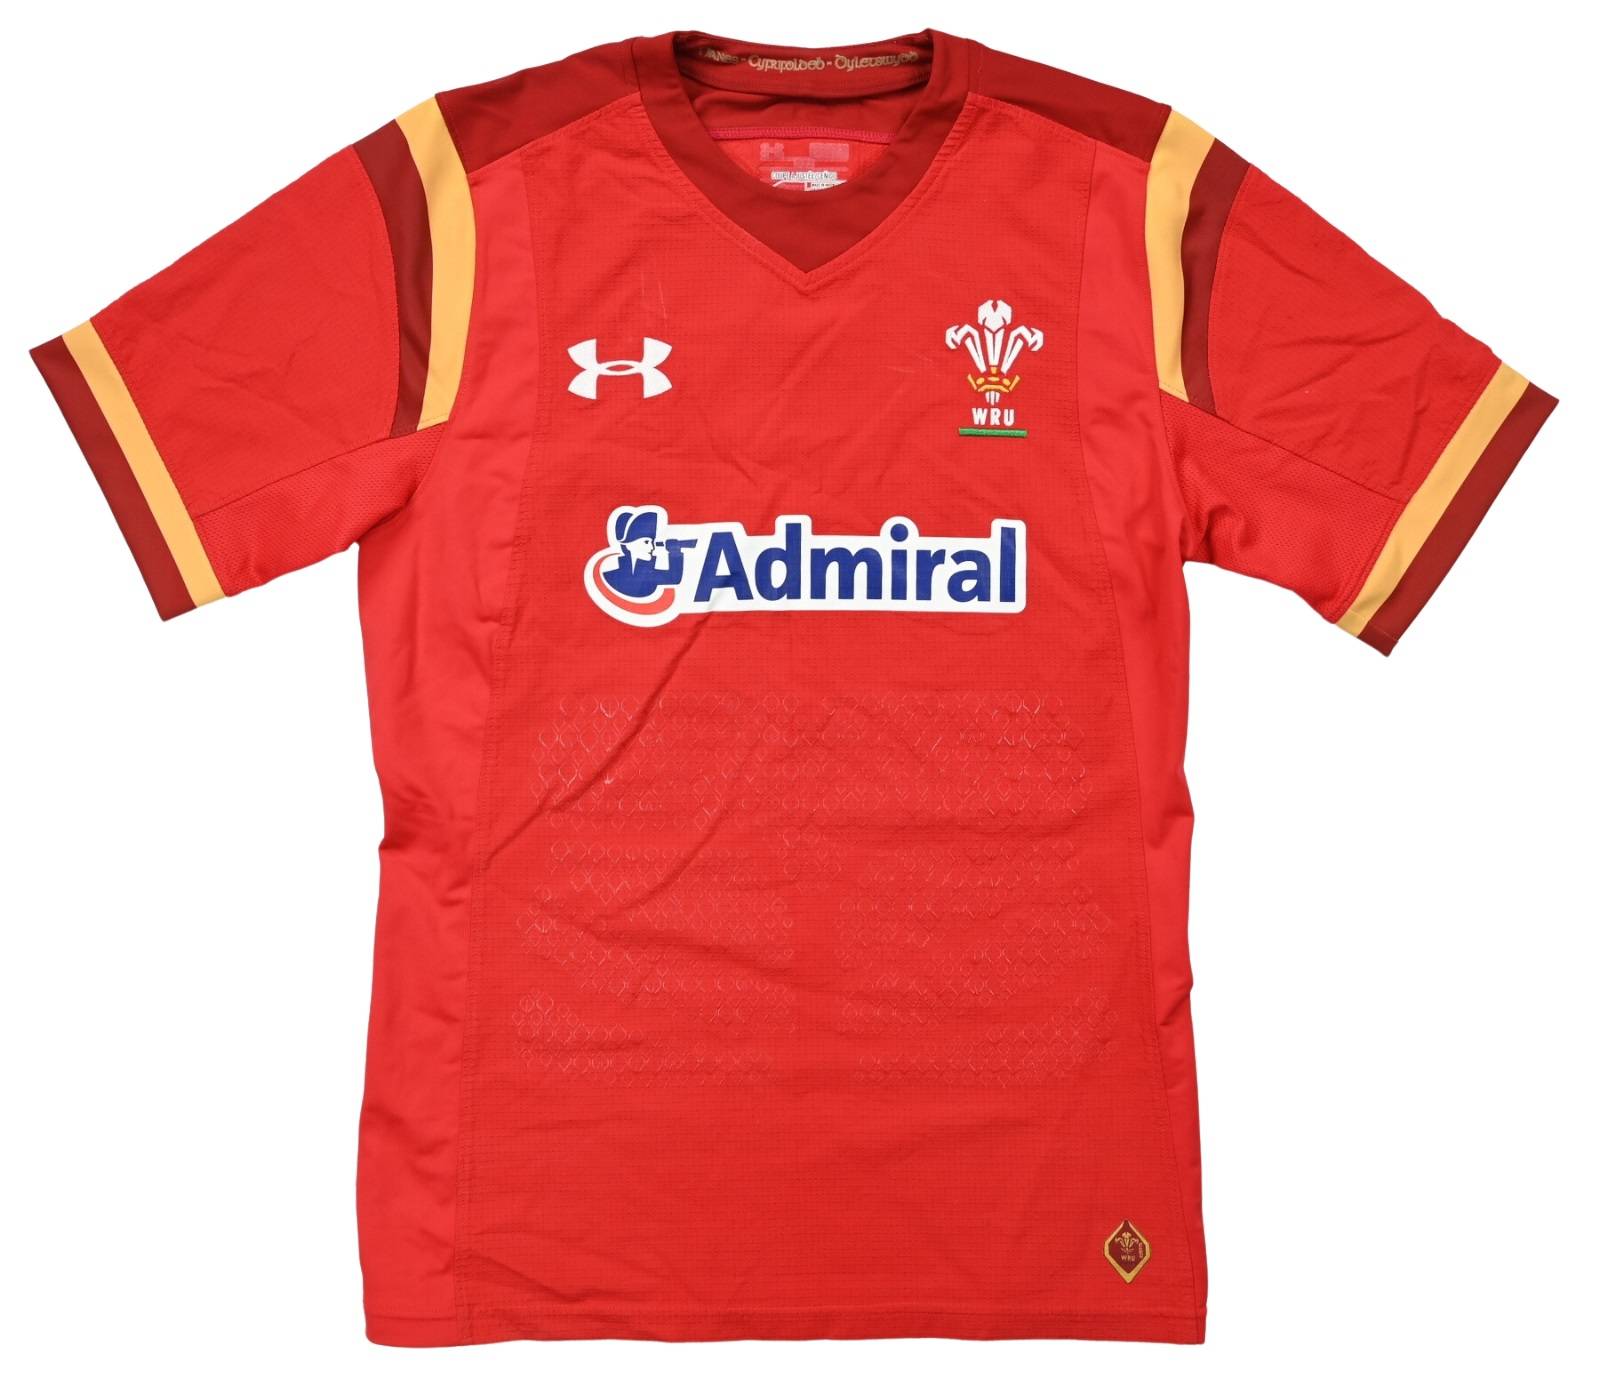 WALES RUGBY SHIRT S Rugby \ Rugby Union \ Wales | Classic-Shirts.com